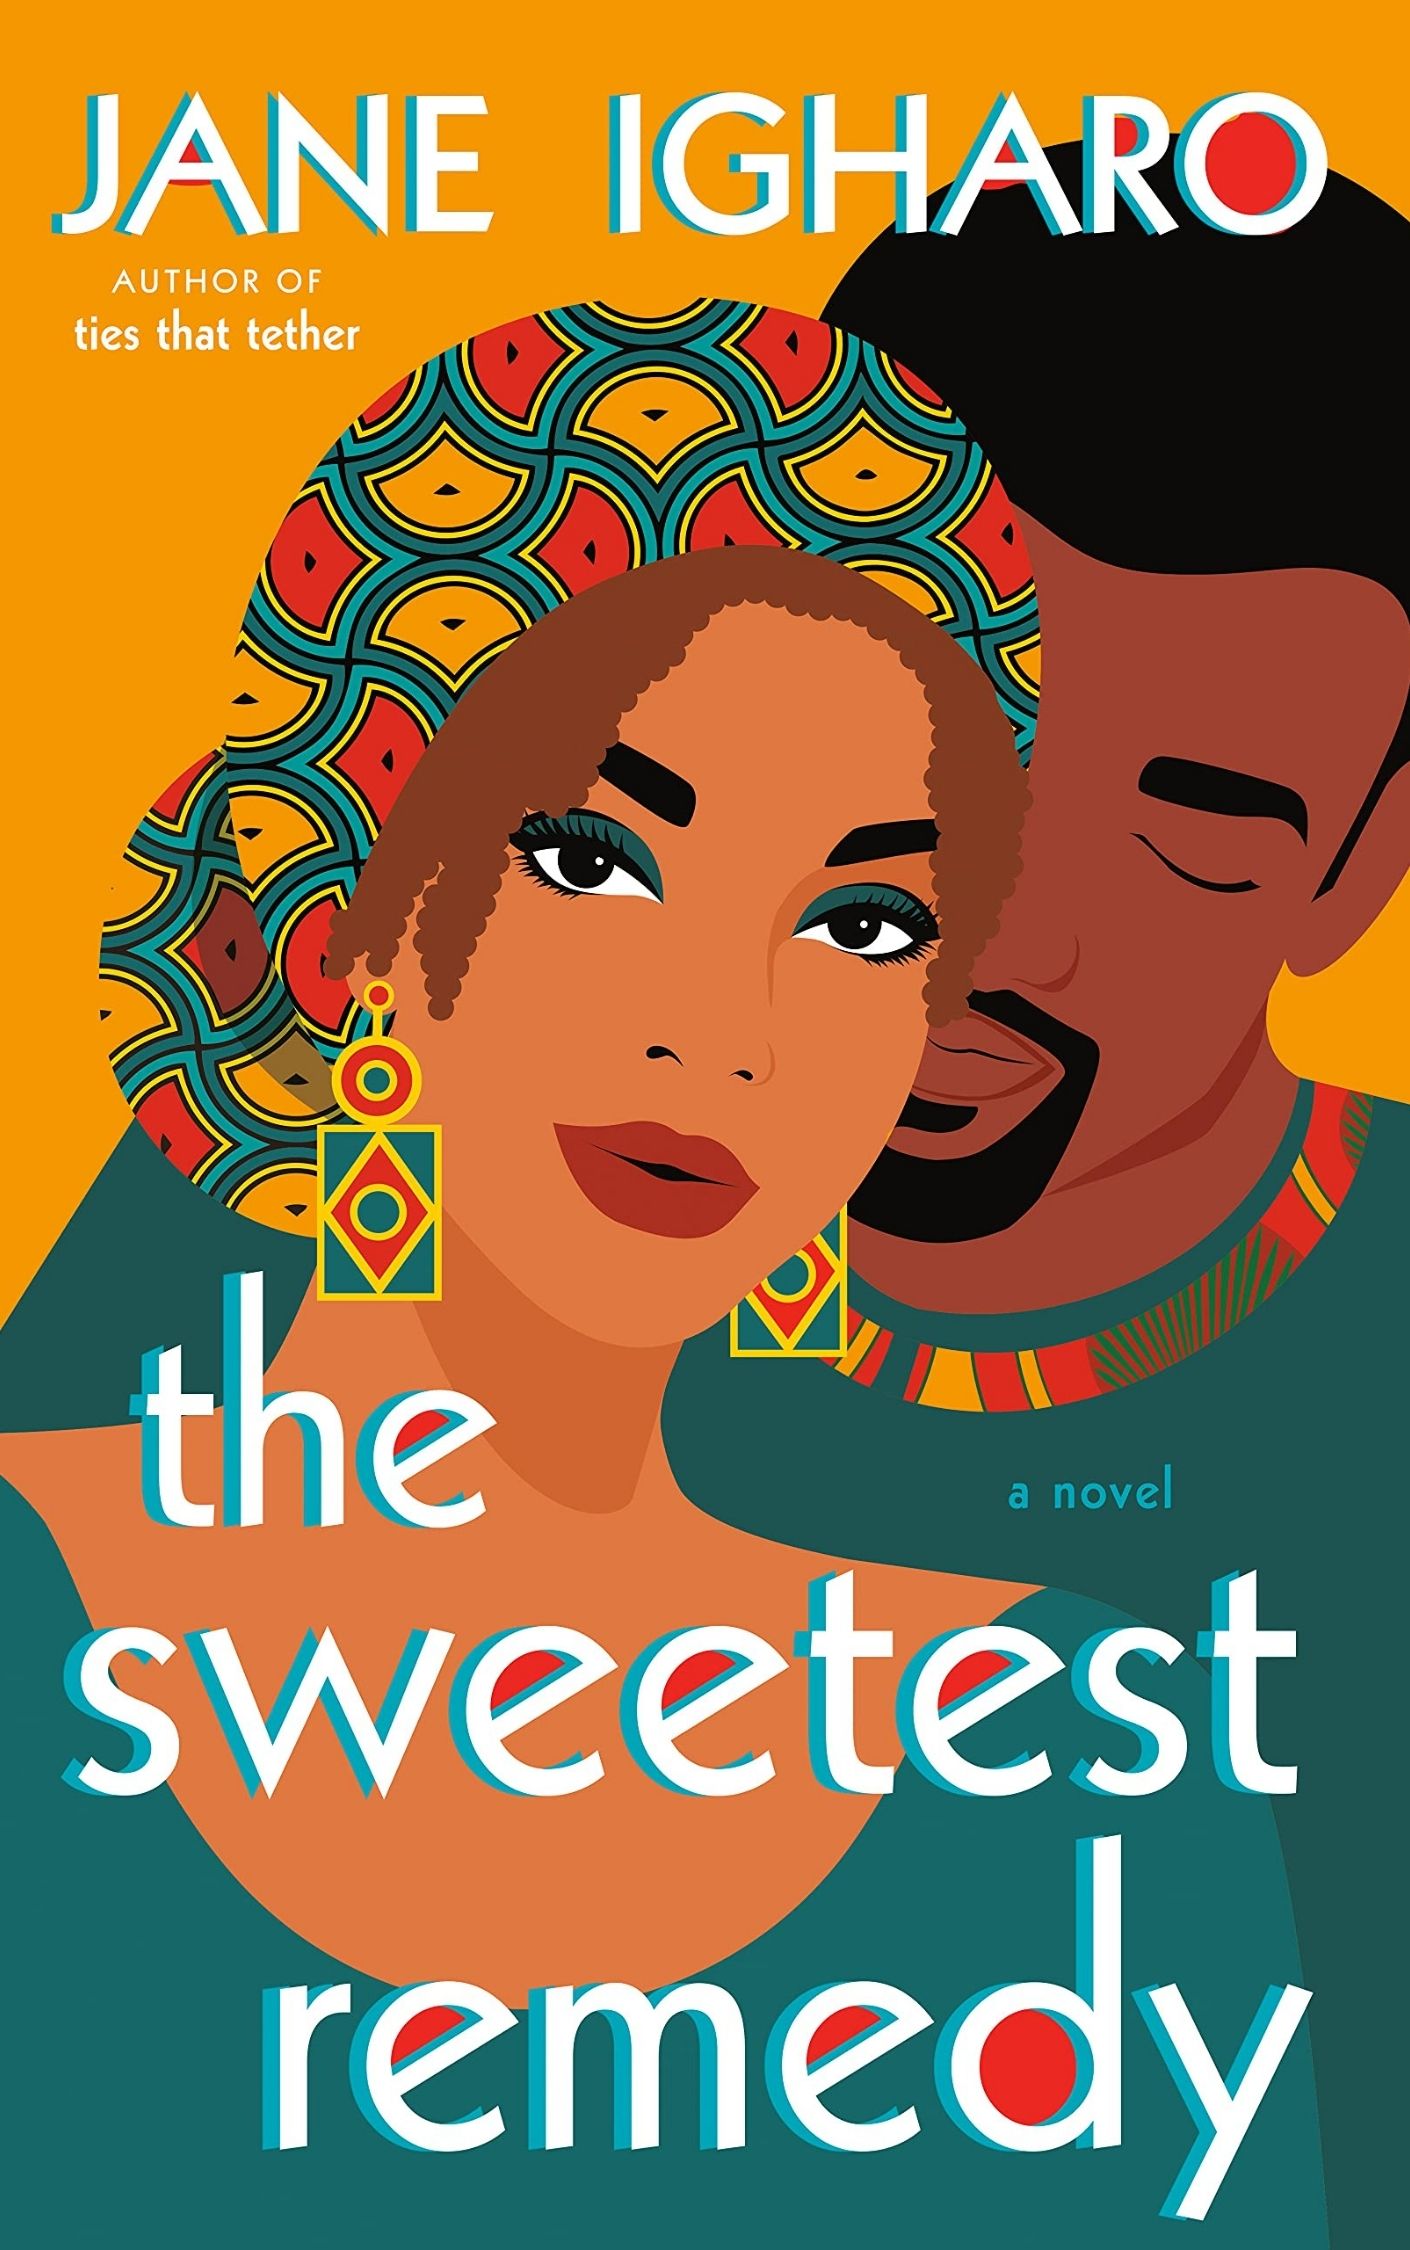 39 African Romance Fiction, Love Stories, and Erotica